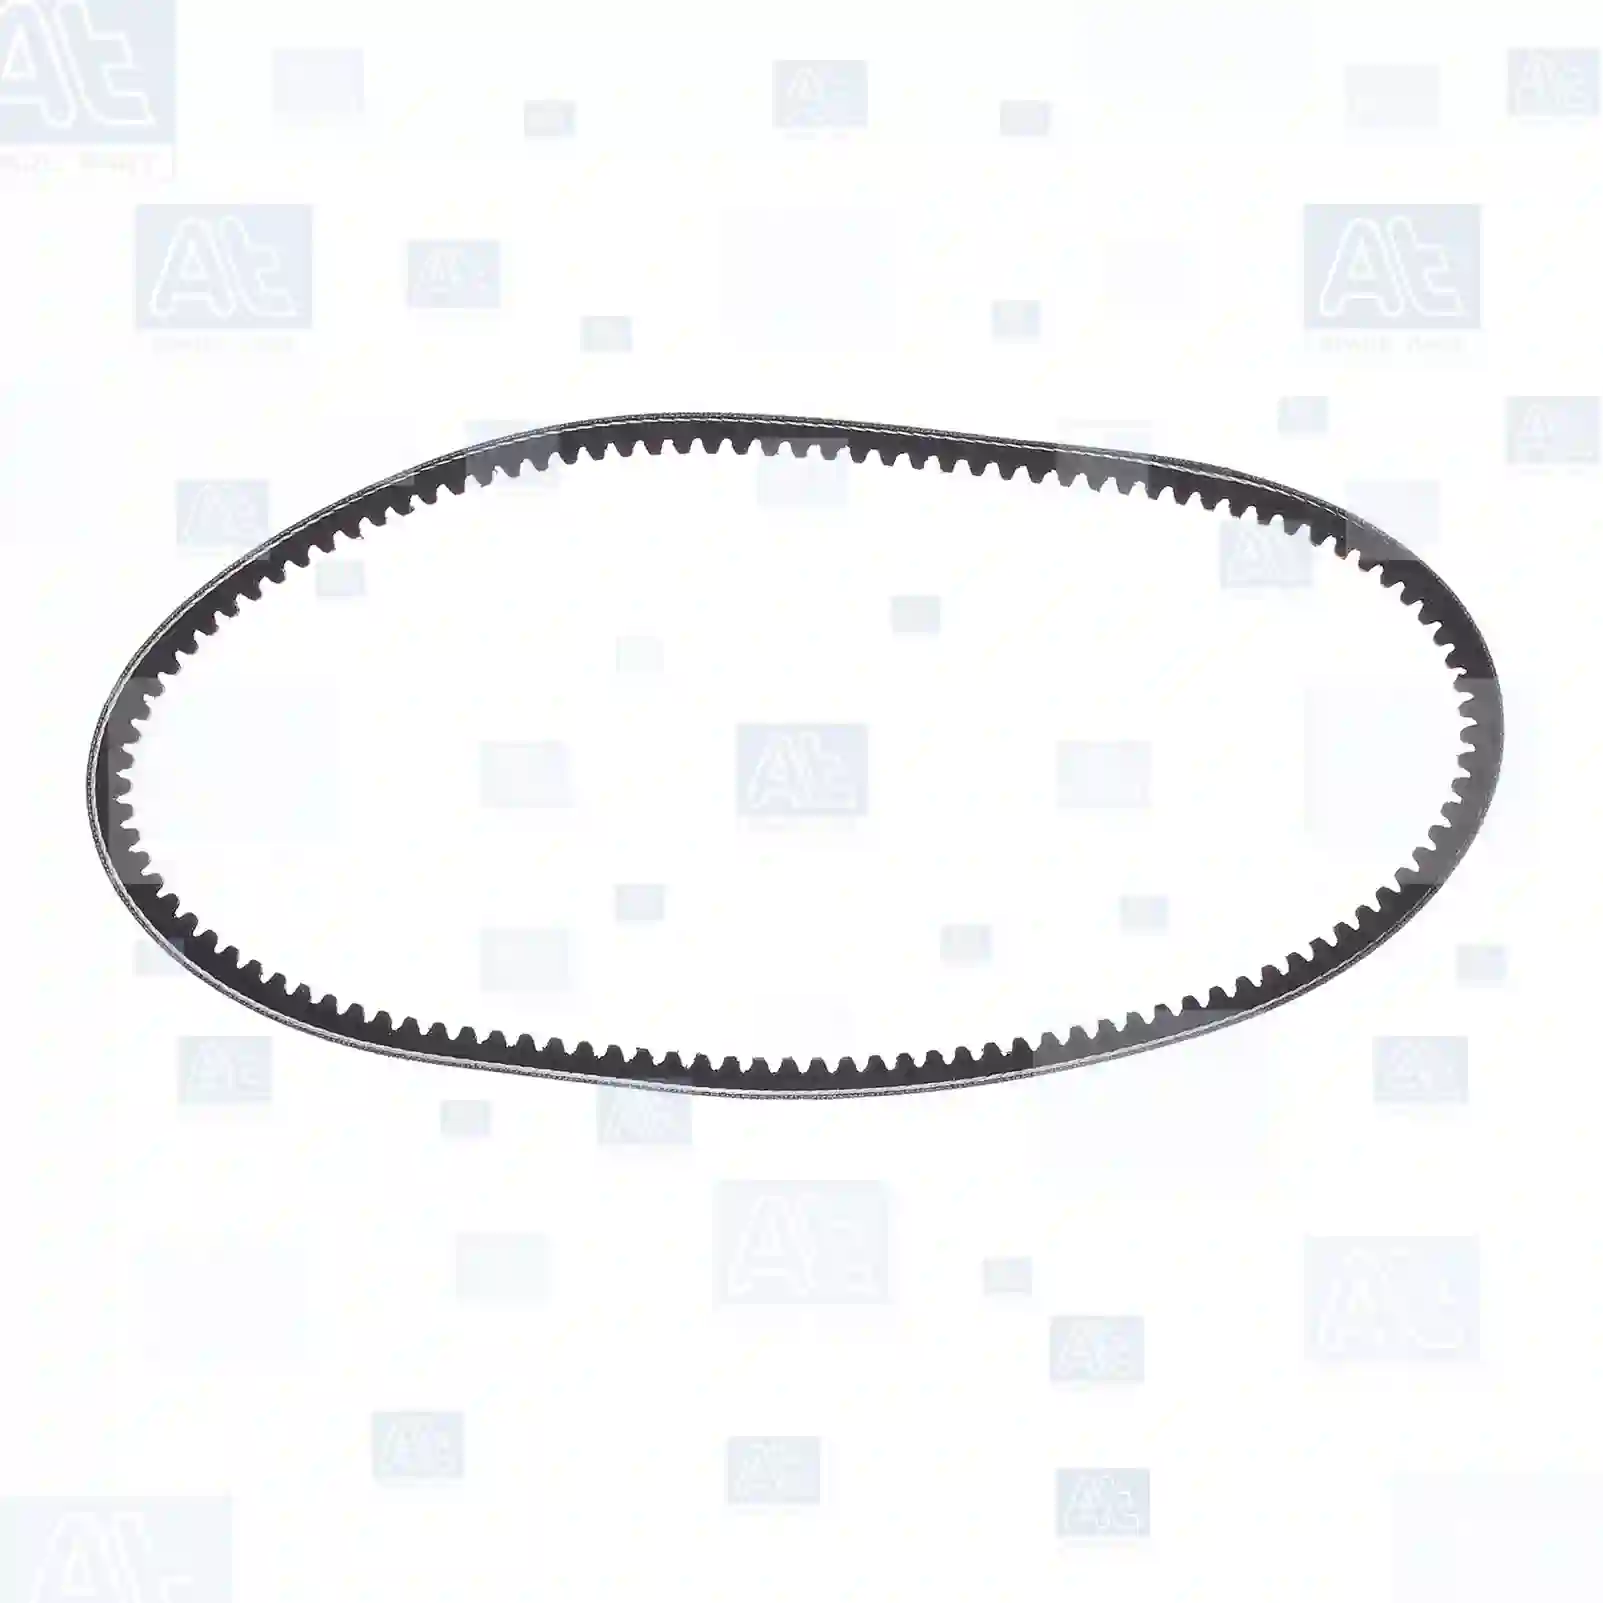 V-belt, at no 77708295, oem no: 07629235, 131539403, 60805196, 60806474, 71739605, ERC5146, 1312976, 720500247, 07629235, 07651549, 07655544, 60533611, 60805196, 60806474, 71739605, 25213-42100, 25215-42000, 57181-43000, 8-94124558-3, 8-94131631-1, 8-94167588-0, 8-94173703-1, 8-94222469-0, 8-94243506-0, 04827114, 4827114, C20887, 25213-42100, 07629235, 07651549, 07655544, 71739605, ERC5146, FE7018381, 0019976492, 0019978192, 0049979592, 0059970792, 0069970992, 007753012500, ERC5146, MB076213, MB166411, MD076231, MD180581, ERC5146, 02117-75523, 02117-76023, 11720-05E65, 11750-D1100, 11950-59W00, 11950-D2015, 11950-D2017, 21600-37W02, 23201-90001, 23201-90009, A1950-VB300, 5000033045, 5000188118, 5000240844, 7700718601, ERC5146, 4766698100, 1201003, ERC5146, 958480, 958525 At Spare Part | Engine, Accelerator Pedal, Camshaft, Connecting Rod, Crankcase, Crankshaft, Cylinder Head, Engine Suspension Mountings, Exhaust Manifold, Exhaust Gas Recirculation, Filter Kits, Flywheel Housing, General Overhaul Kits, Engine, Intake Manifold, Oil Cleaner, Oil Cooler, Oil Filter, Oil Pump, Oil Sump, Piston & Liner, Sensor & Switch, Timing Case, Turbocharger, Cooling System, Belt Tensioner, Coolant Filter, Coolant Pipe, Corrosion Prevention Agent, Drive, Expansion Tank, Fan, Intercooler, Monitors & Gauges, Radiator, Thermostat, V-Belt / Timing belt, Water Pump, Fuel System, Electronical Injector Unit, Feed Pump, Fuel Filter, cpl., Fuel Gauge Sender,  Fuel Line, Fuel Pump, Fuel Tank, Injection Line Kit, Injection Pump, Exhaust System, Clutch & Pedal, Gearbox, Propeller Shaft, Axles, Brake System, Hubs & Wheels, Suspension, Leaf Spring, Universal Parts / Accessories, Steering, Electrical System, Cabin V-belt, at no 77708295, oem no: 07629235, 131539403, 60805196, 60806474, 71739605, ERC5146, 1312976, 720500247, 07629235, 07651549, 07655544, 60533611, 60805196, 60806474, 71739605, 25213-42100, 25215-42000, 57181-43000, 8-94124558-3, 8-94131631-1, 8-94167588-0, 8-94173703-1, 8-94222469-0, 8-94243506-0, 04827114, 4827114, C20887, 25213-42100, 07629235, 07651549, 07655544, 71739605, ERC5146, FE7018381, 0019976492, 0019978192, 0049979592, 0059970792, 0069970992, 007753012500, ERC5146, MB076213, MB166411, MD076231, MD180581, ERC5146, 02117-75523, 02117-76023, 11720-05E65, 11750-D1100, 11950-59W00, 11950-D2015, 11950-D2017, 21600-37W02, 23201-90001, 23201-90009, A1950-VB300, 5000033045, 5000188118, 5000240844, 7700718601, ERC5146, 4766698100, 1201003, ERC5146, 958480, 958525 At Spare Part | Engine, Accelerator Pedal, Camshaft, Connecting Rod, Crankcase, Crankshaft, Cylinder Head, Engine Suspension Mountings, Exhaust Manifold, Exhaust Gas Recirculation, Filter Kits, Flywheel Housing, General Overhaul Kits, Engine, Intake Manifold, Oil Cleaner, Oil Cooler, Oil Filter, Oil Pump, Oil Sump, Piston & Liner, Sensor & Switch, Timing Case, Turbocharger, Cooling System, Belt Tensioner, Coolant Filter, Coolant Pipe, Corrosion Prevention Agent, Drive, Expansion Tank, Fan, Intercooler, Monitors & Gauges, Radiator, Thermostat, V-Belt / Timing belt, Water Pump, Fuel System, Electronical Injector Unit, Feed Pump, Fuel Filter, cpl., Fuel Gauge Sender,  Fuel Line, Fuel Pump, Fuel Tank, Injection Line Kit, Injection Pump, Exhaust System, Clutch & Pedal, Gearbox, Propeller Shaft, Axles, Brake System, Hubs & Wheels, Suspension, Leaf Spring, Universal Parts / Accessories, Steering, Electrical System, Cabin